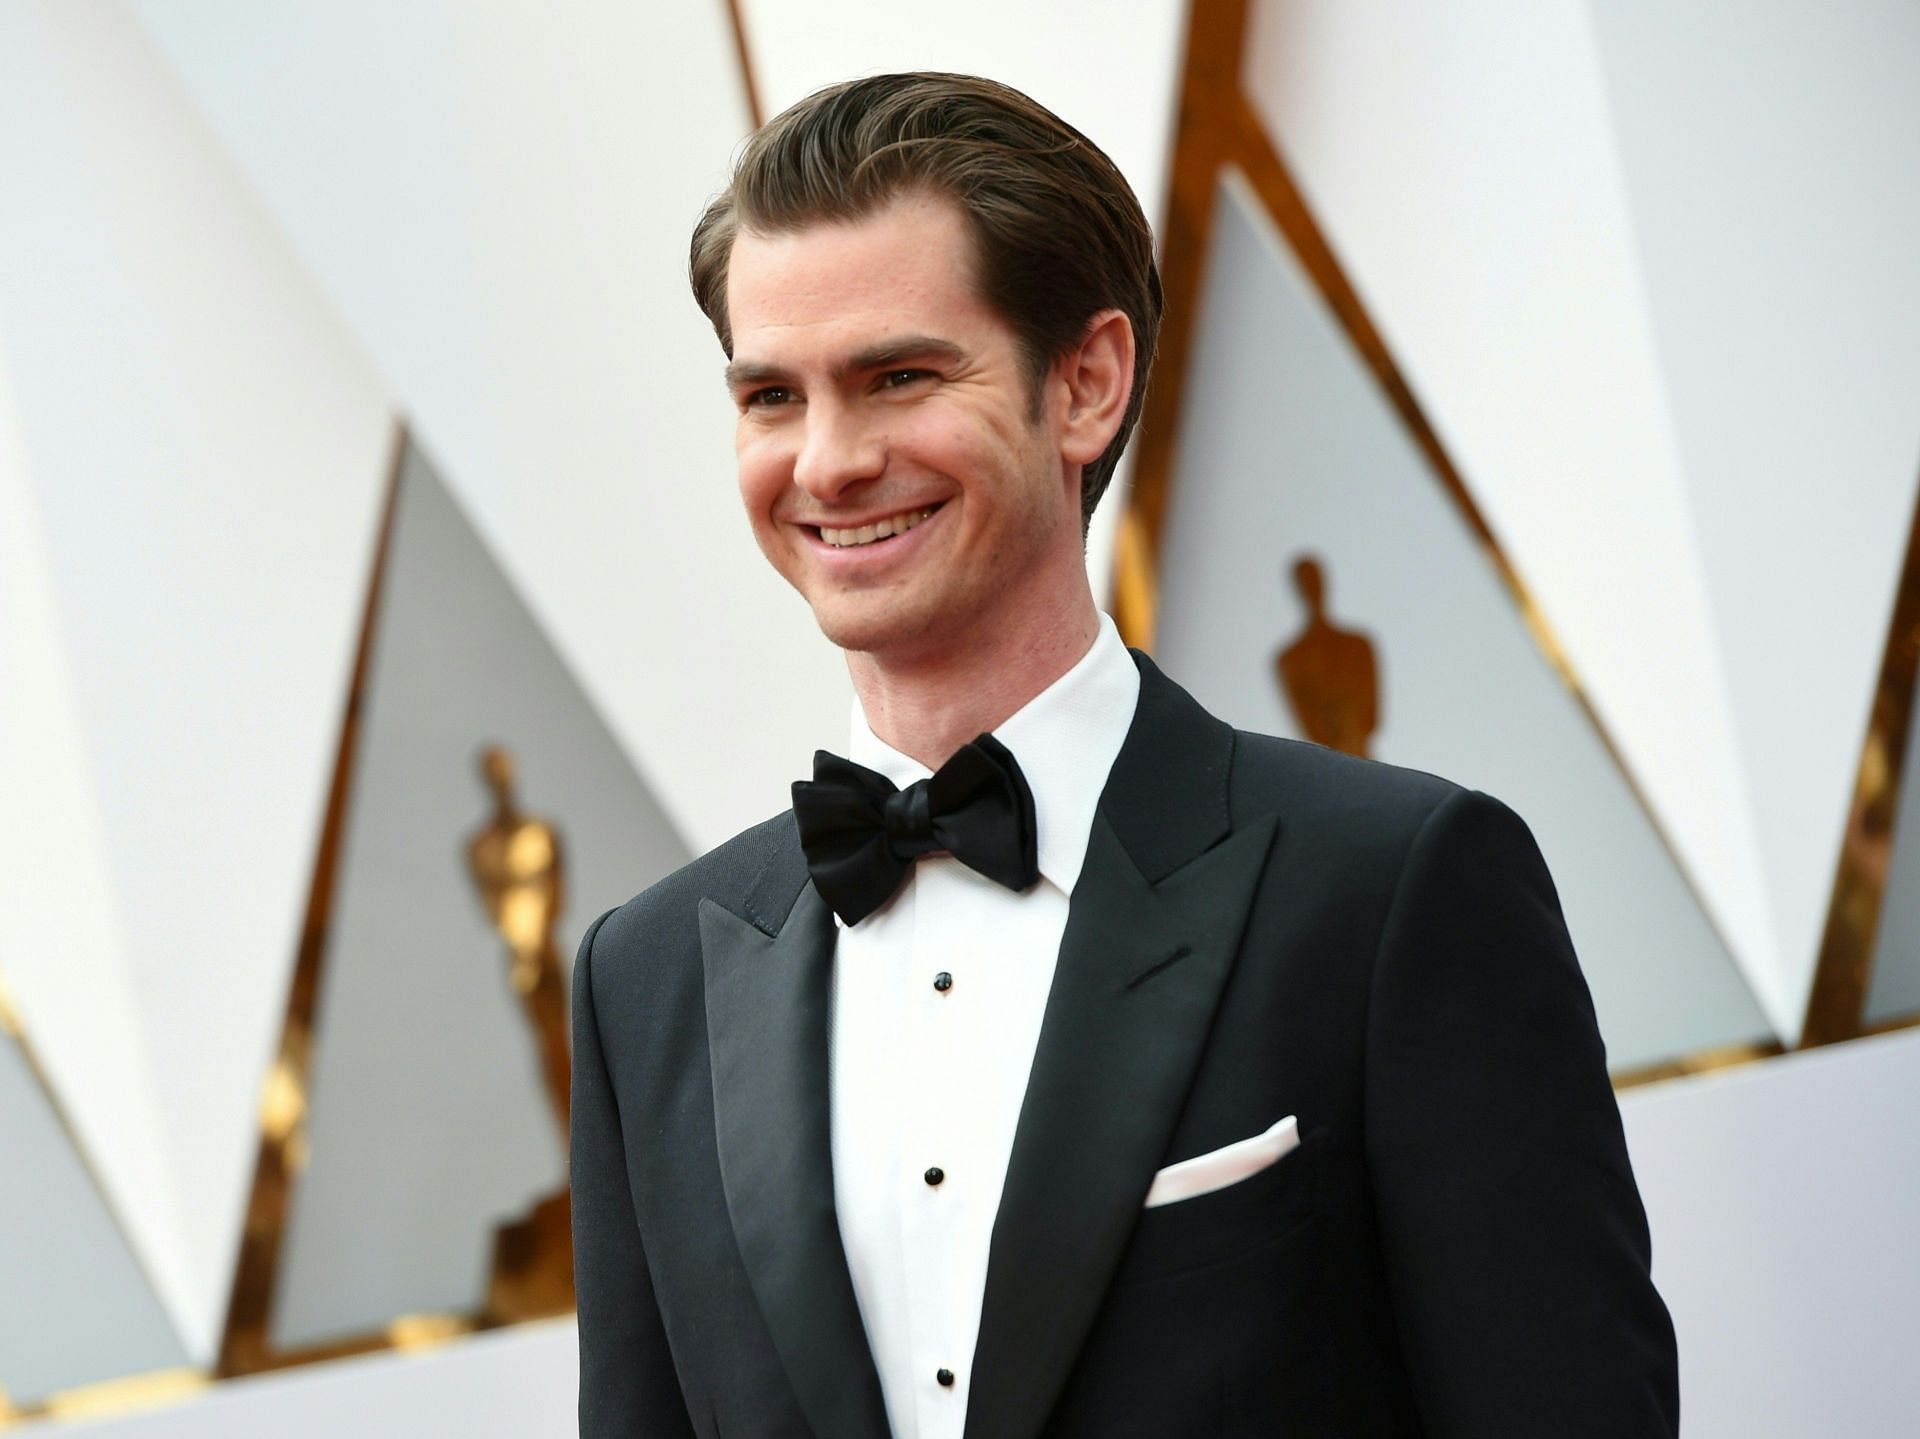 Andrew Garfield (Image via Getty Images/ Valerie Macon)